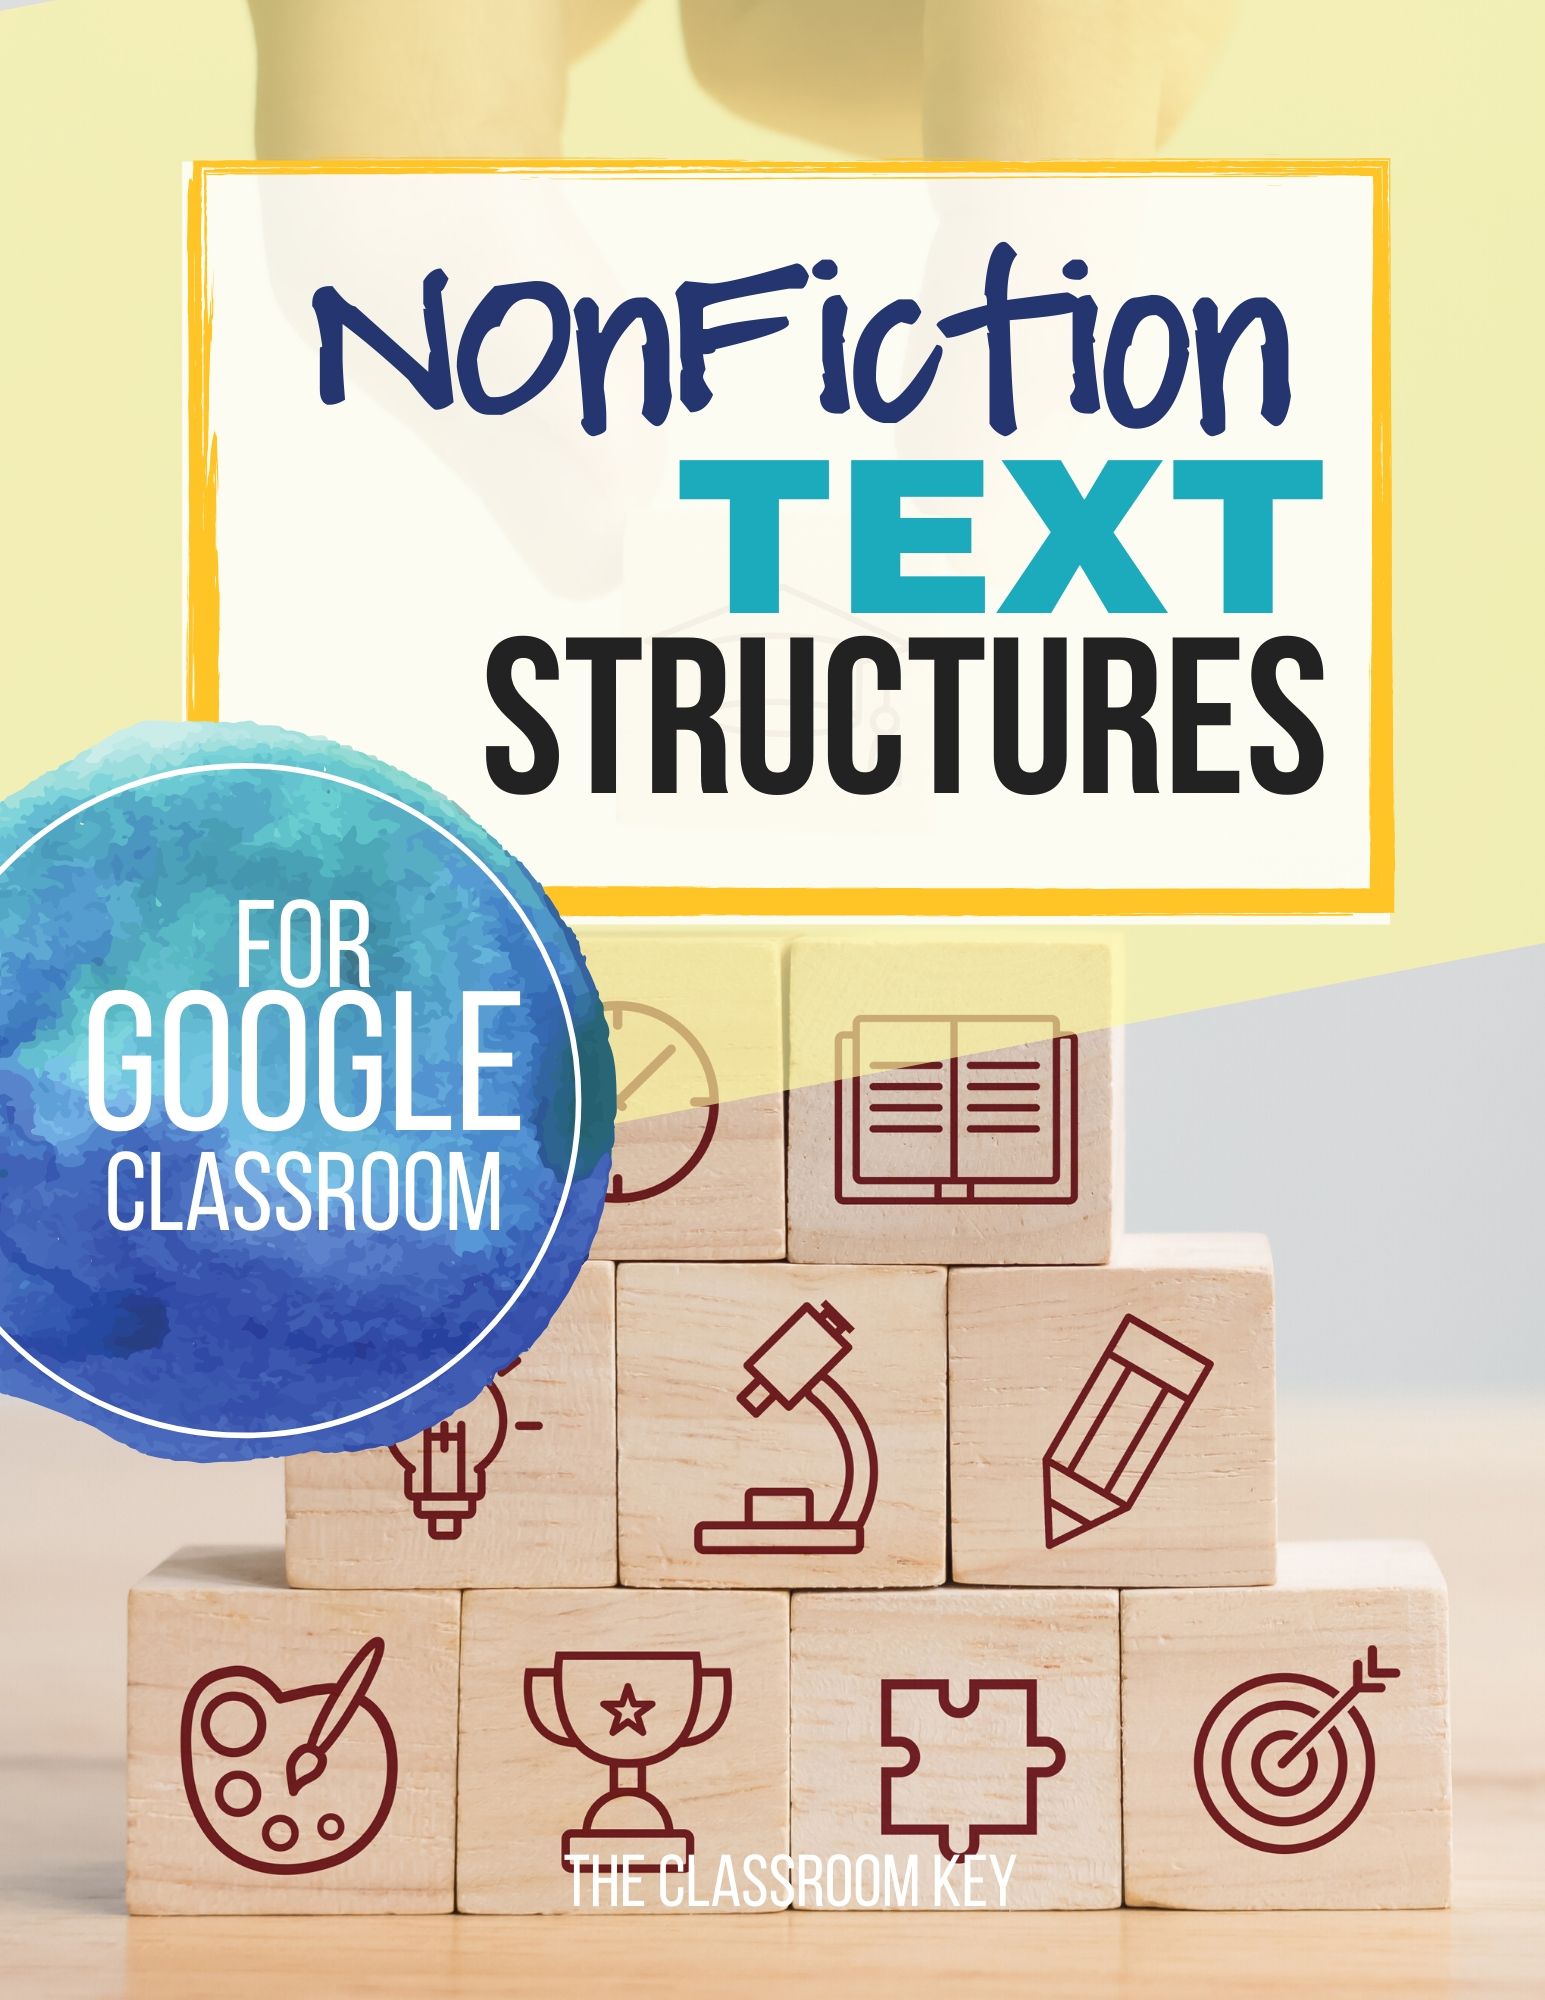 Improve reading comprehension skills with this nonfiction text structures unit for the digital classroom and distance learning. Includes interactive lessons, practice activities, lesson plans, and more. Perfect for 2nd and 3rd grade, addresses Common Core standards RI.2.3, RI.2.6, RI.3.3, RI.3.8